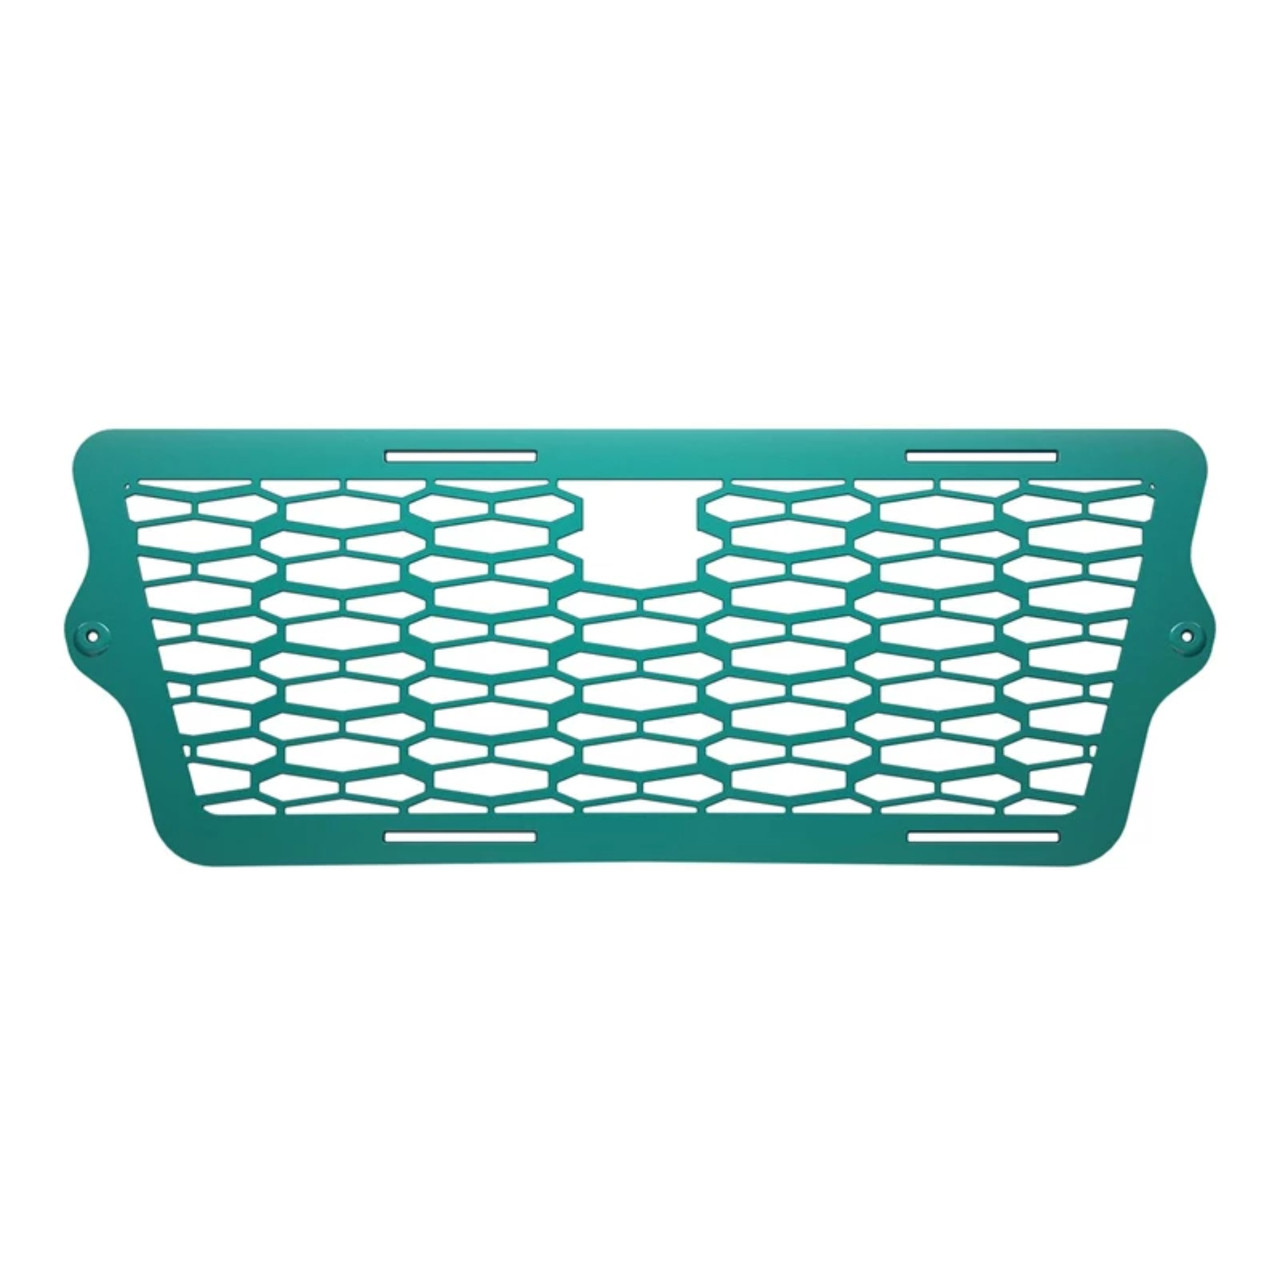 Polaris New OEM Painted Front Grille Pacific Teal, Slingshot, 2884148-882